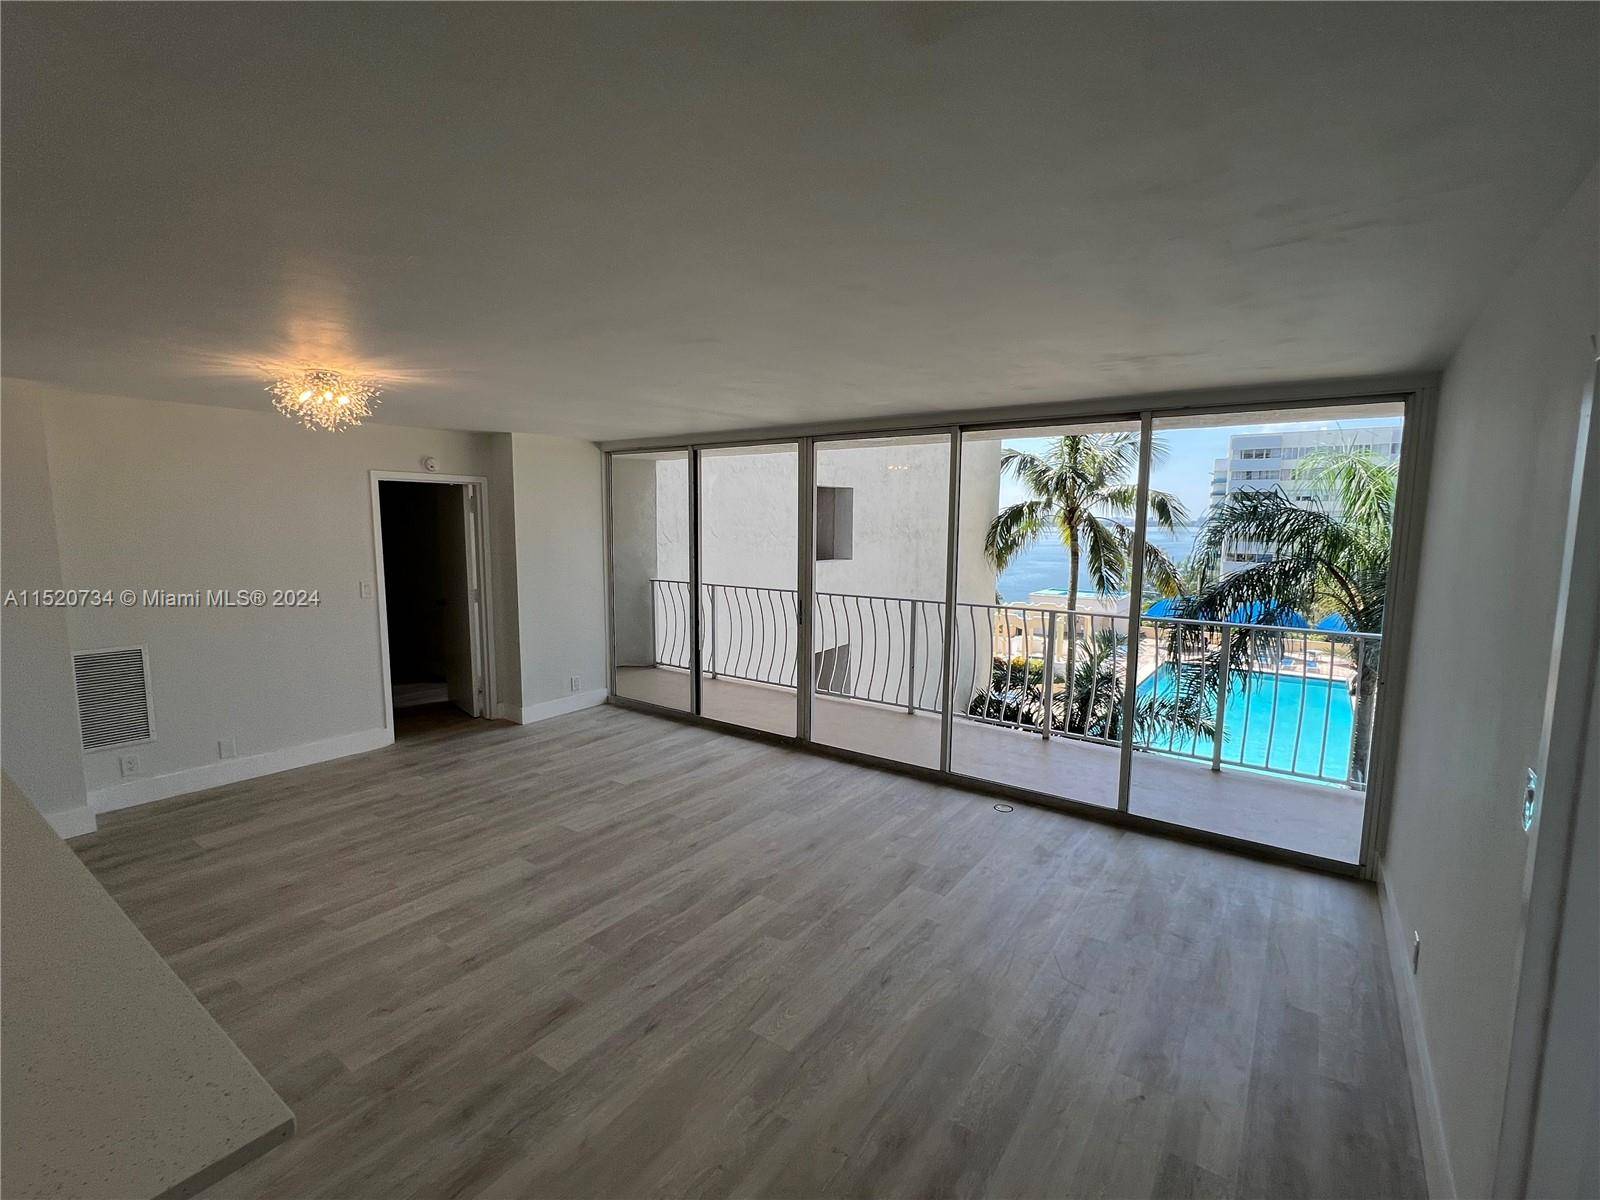 Beautifully remodeled 2bed 2bath unit with water views overlooking renovated swimming pool tropical terrace area.